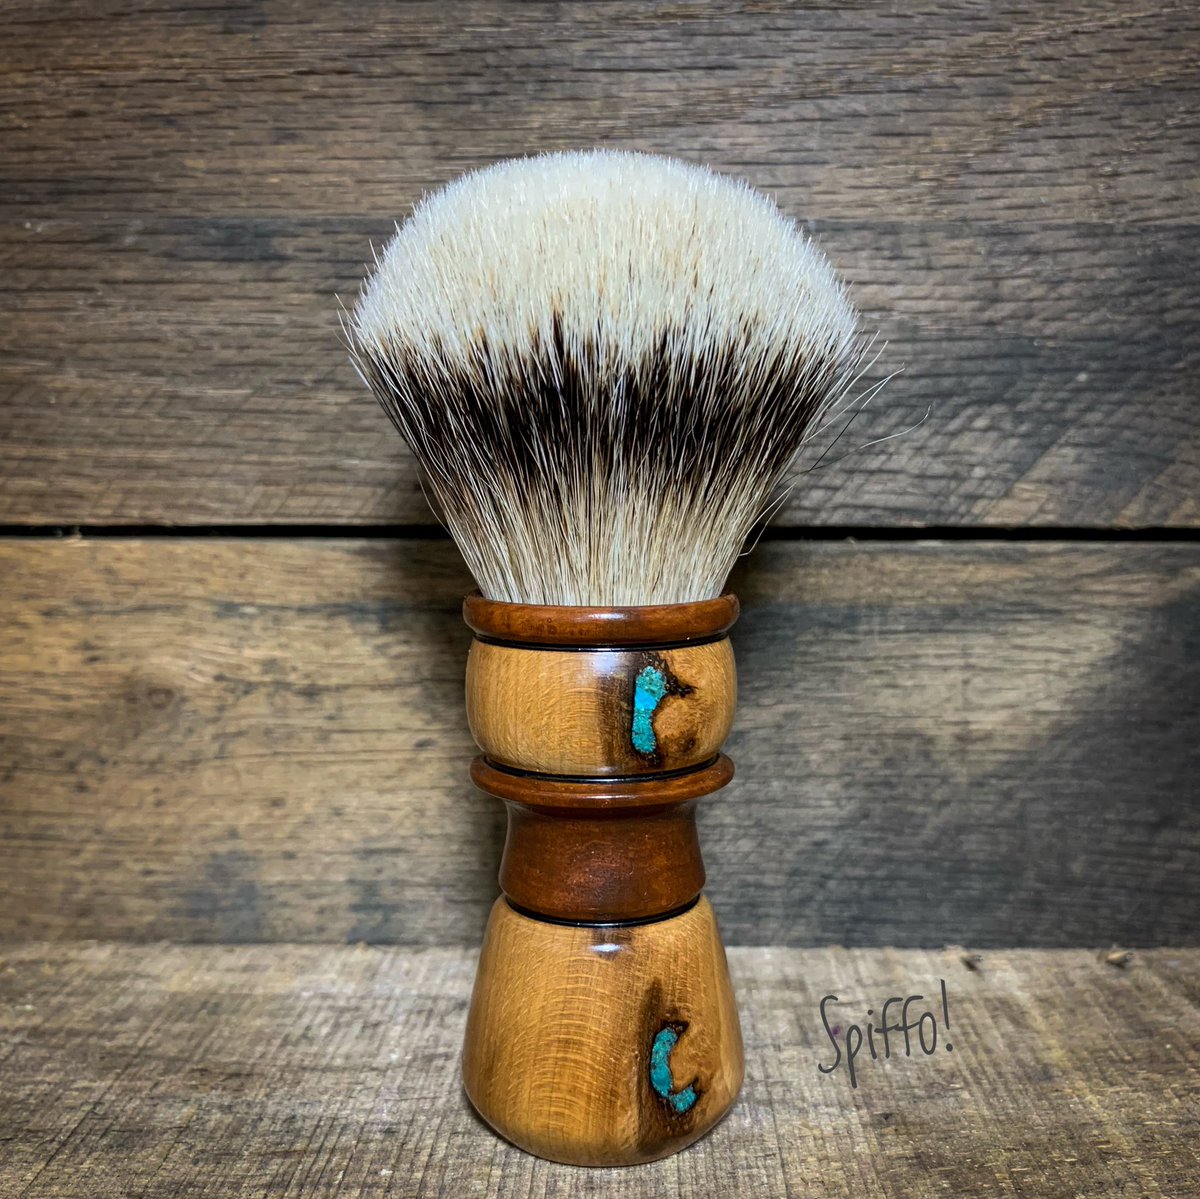 It's Hinoon! This Beech wood shaving brush features brown accents, strikingly beautiful turquoise stone inlays and a High Mountain White knot. Check it out at spiffo.com 😎 #shavingbrushes #shavingbrush #spiffo #spiffoman #shaving #wetshaving #halifax #novascotia